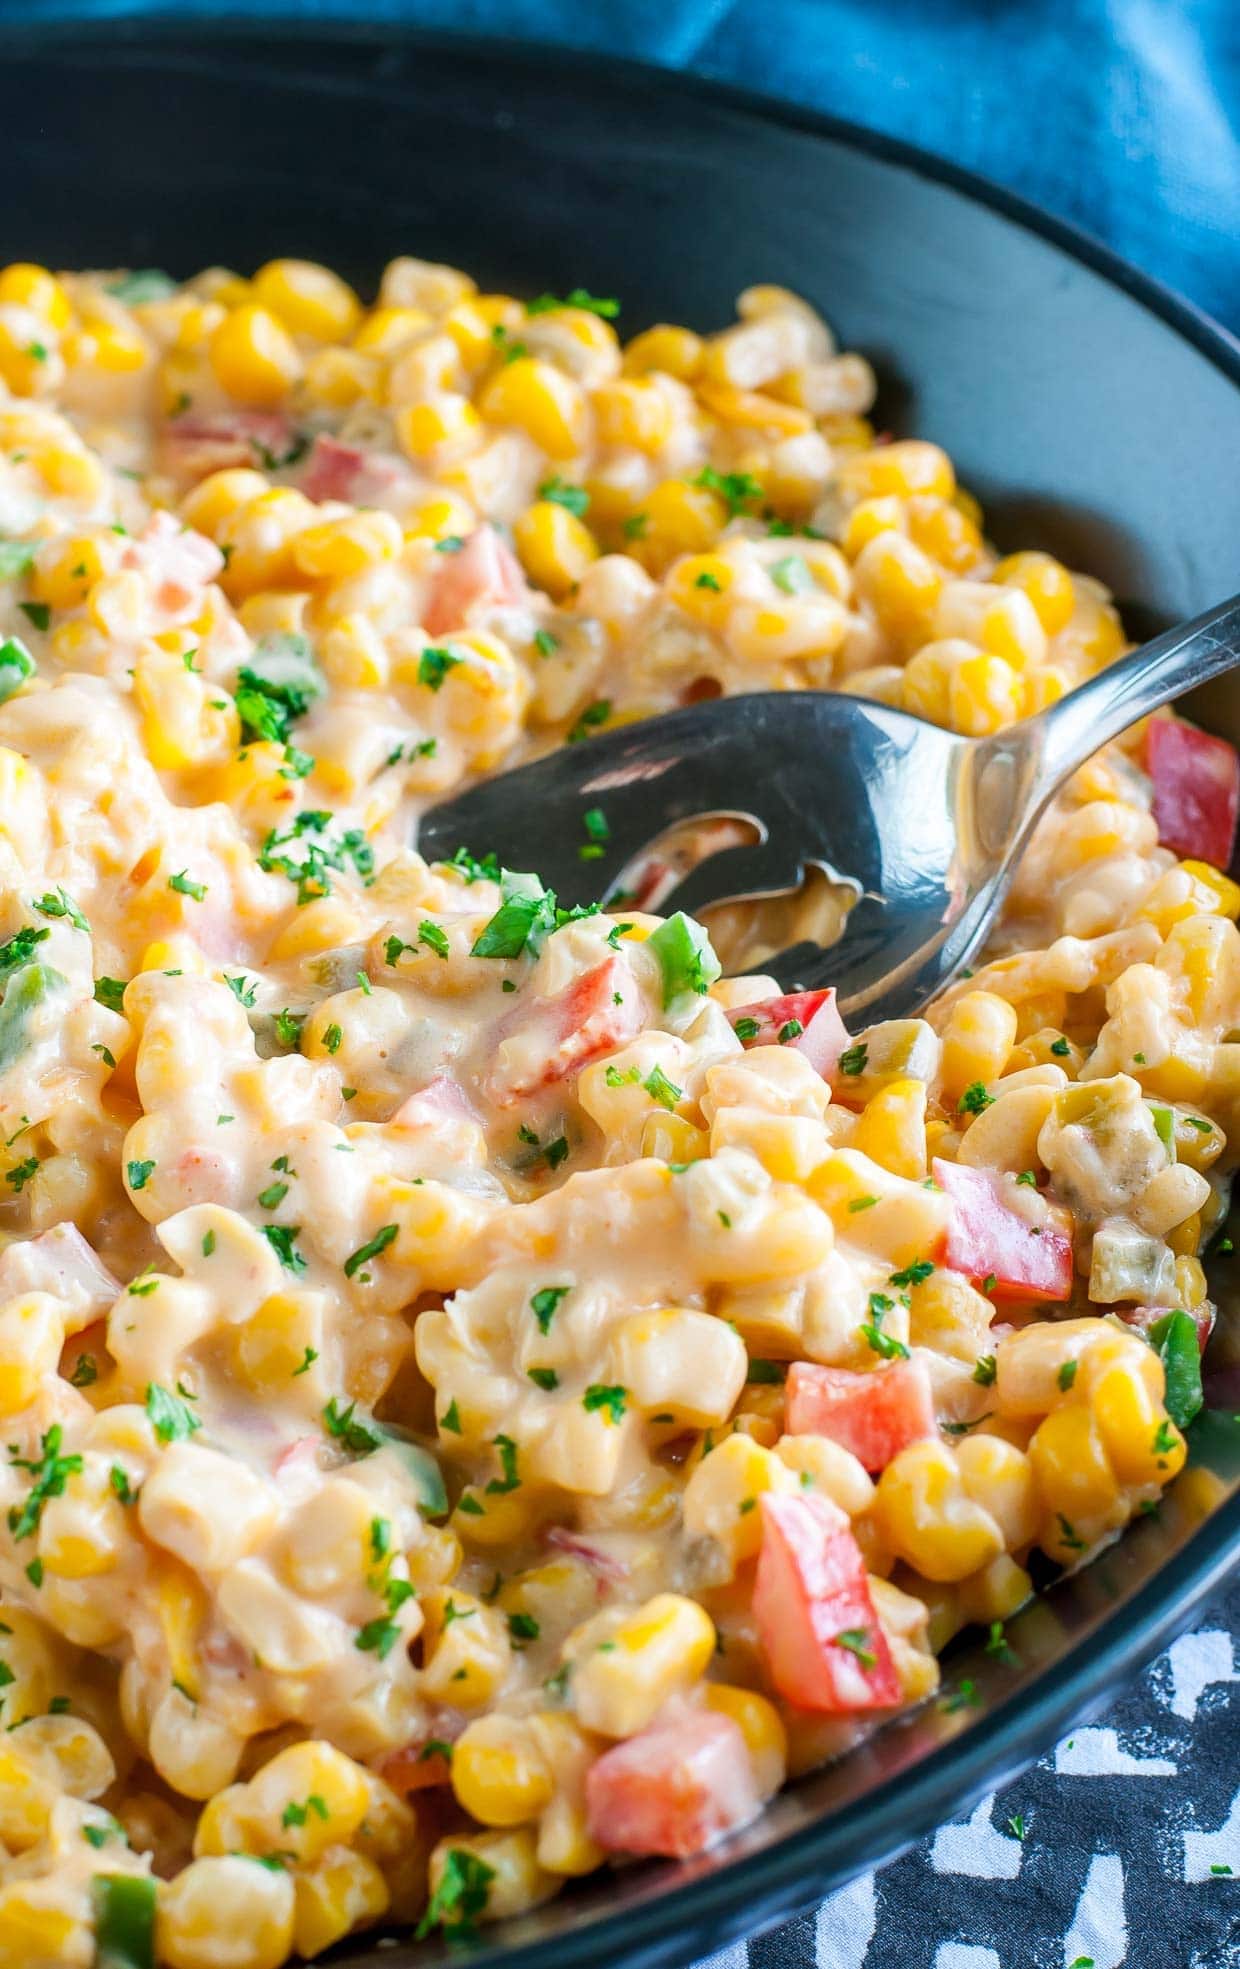 Creamy spicy southern hot corn in a black plate with a serving spoon.  